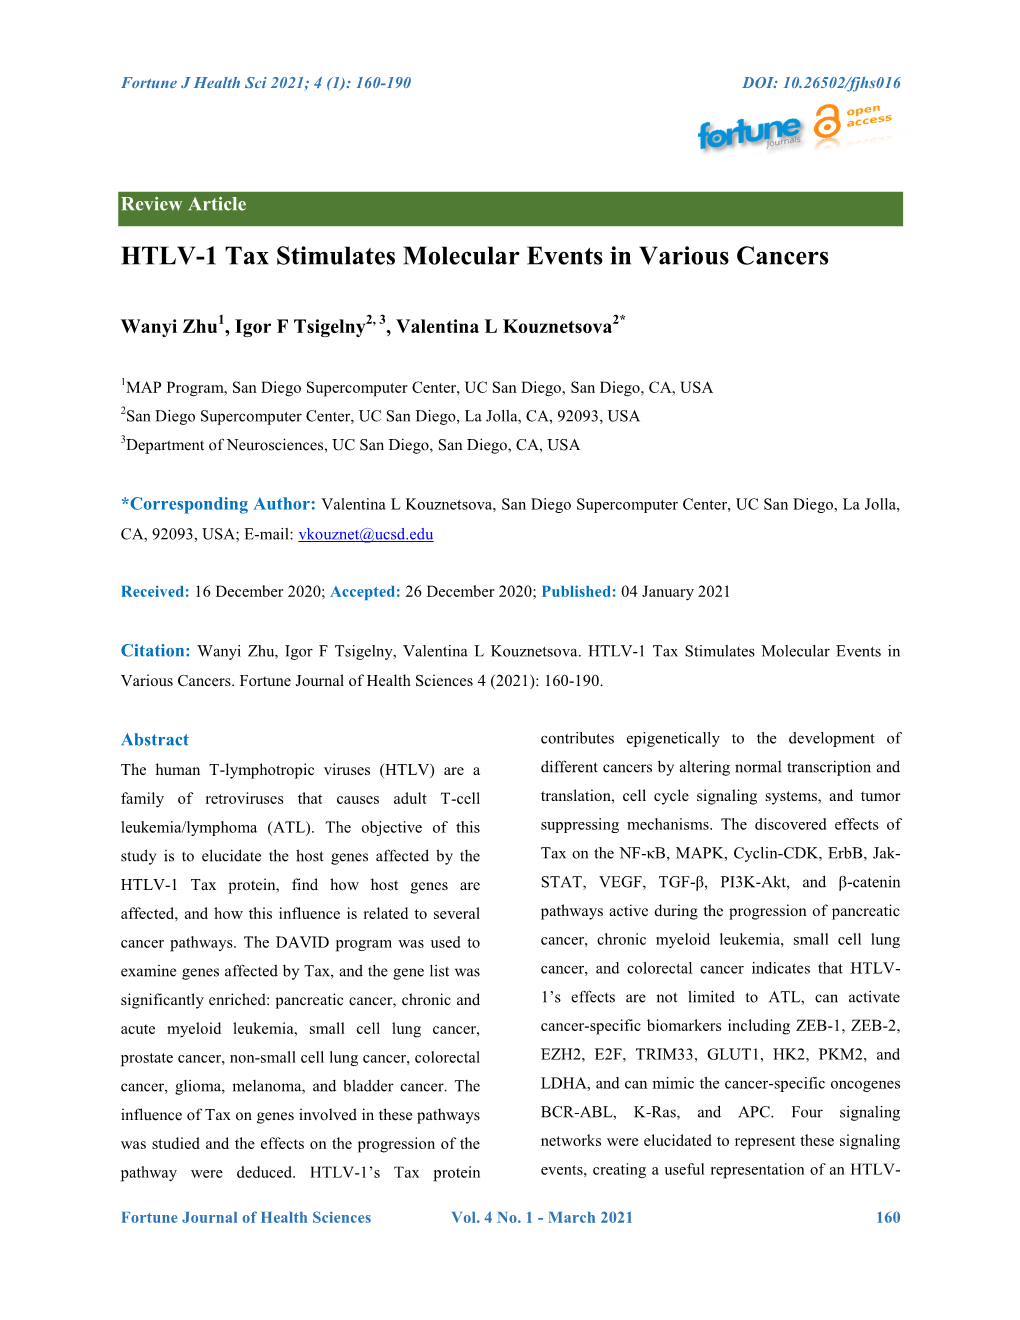 HTLV-1 Tax Stimulates Molecular Events in Various Cancers